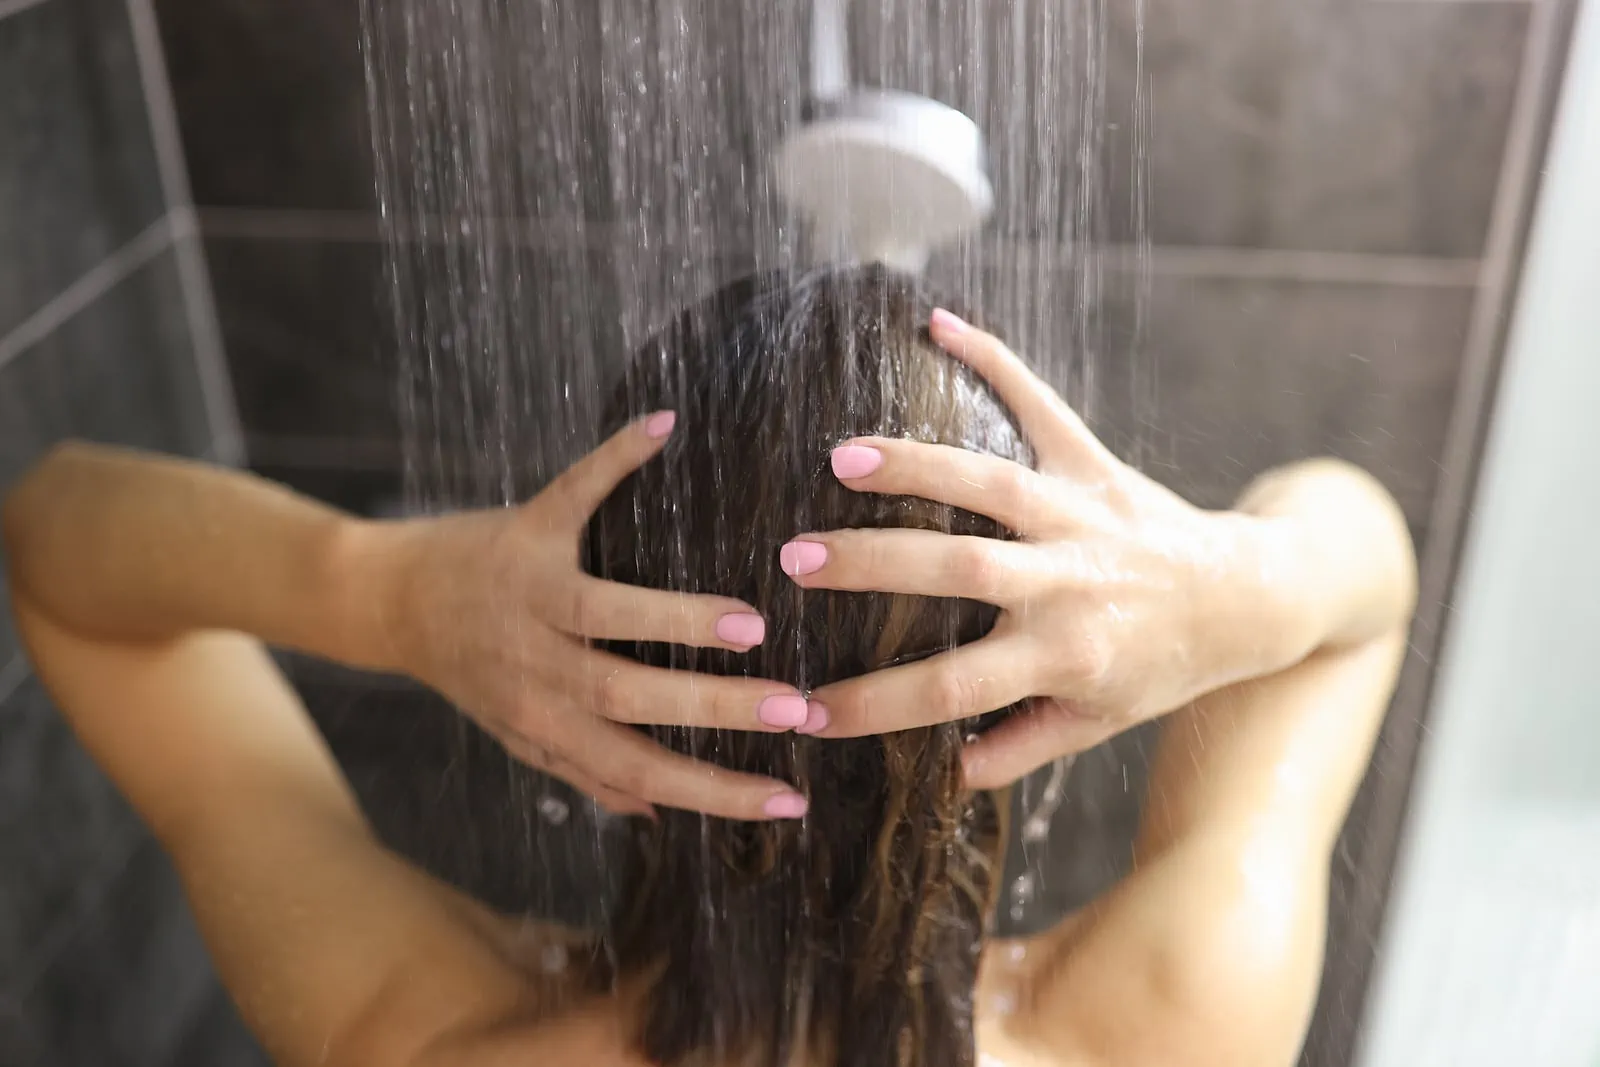 Relief at Last: How Water Softeners Help Prevent Post-Shower Itch